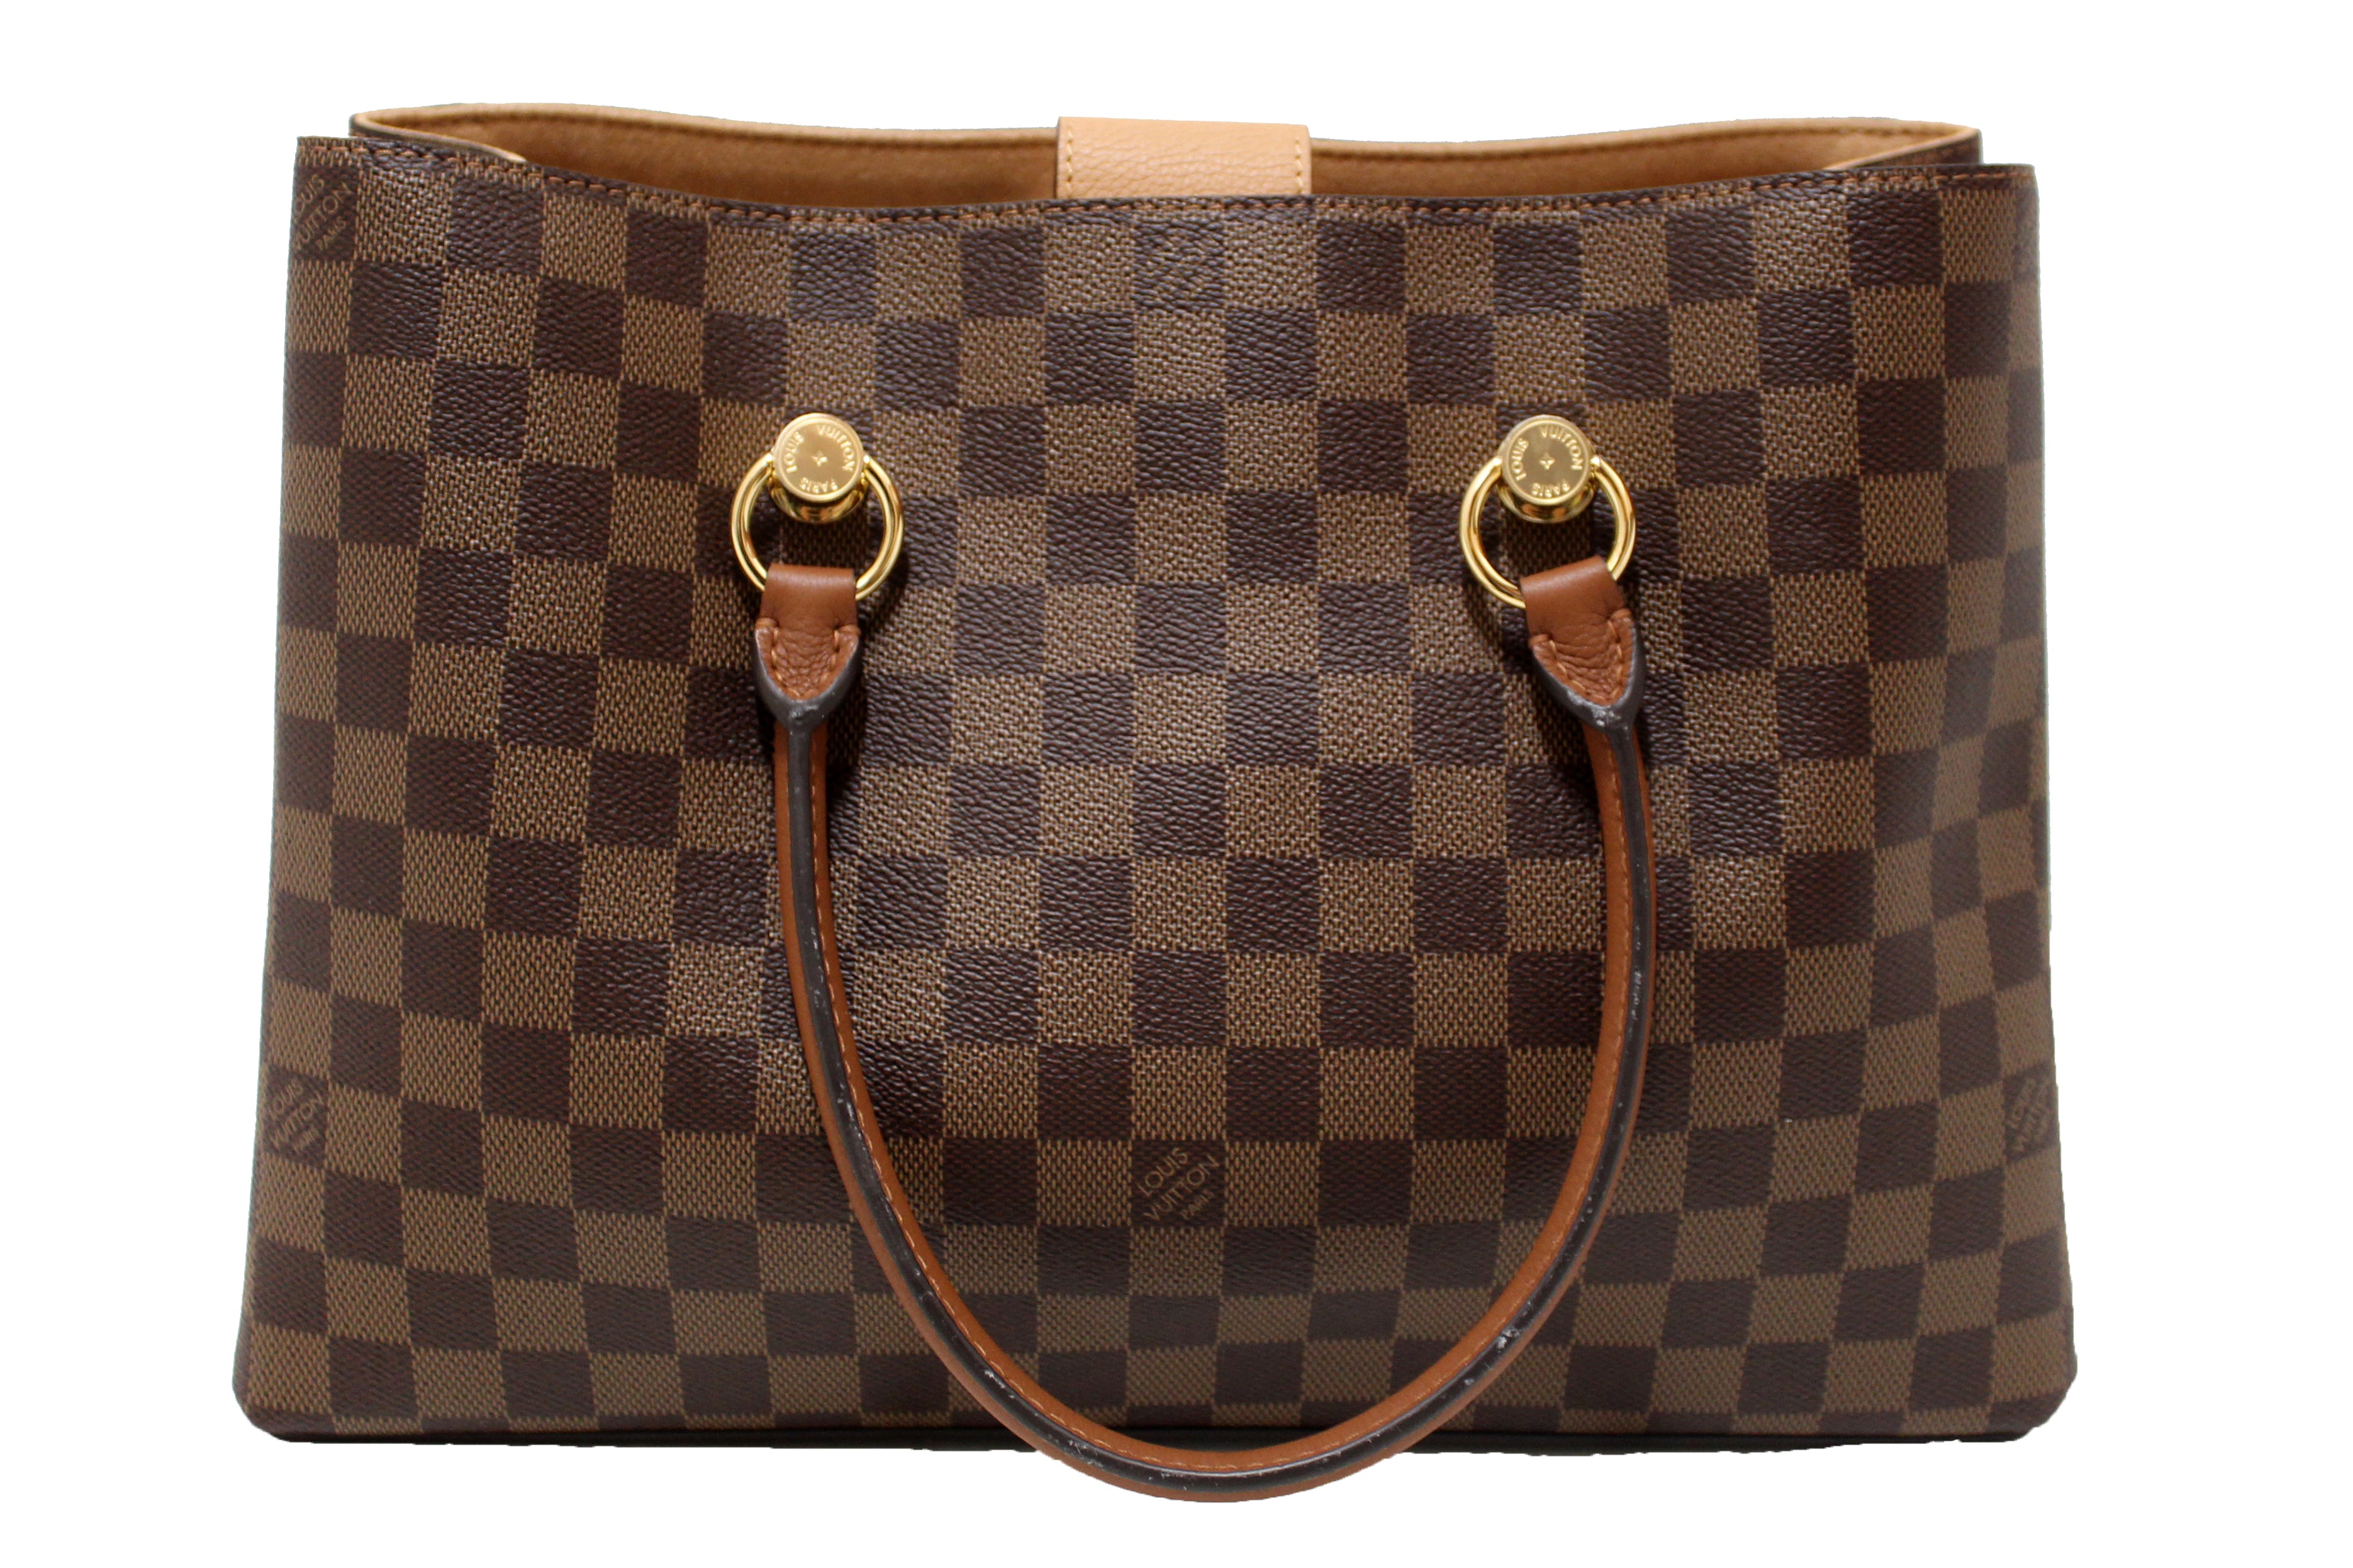 Authentic Louis Vuitton Damier Ebene Canvas with Brown Leather Riverside Bag